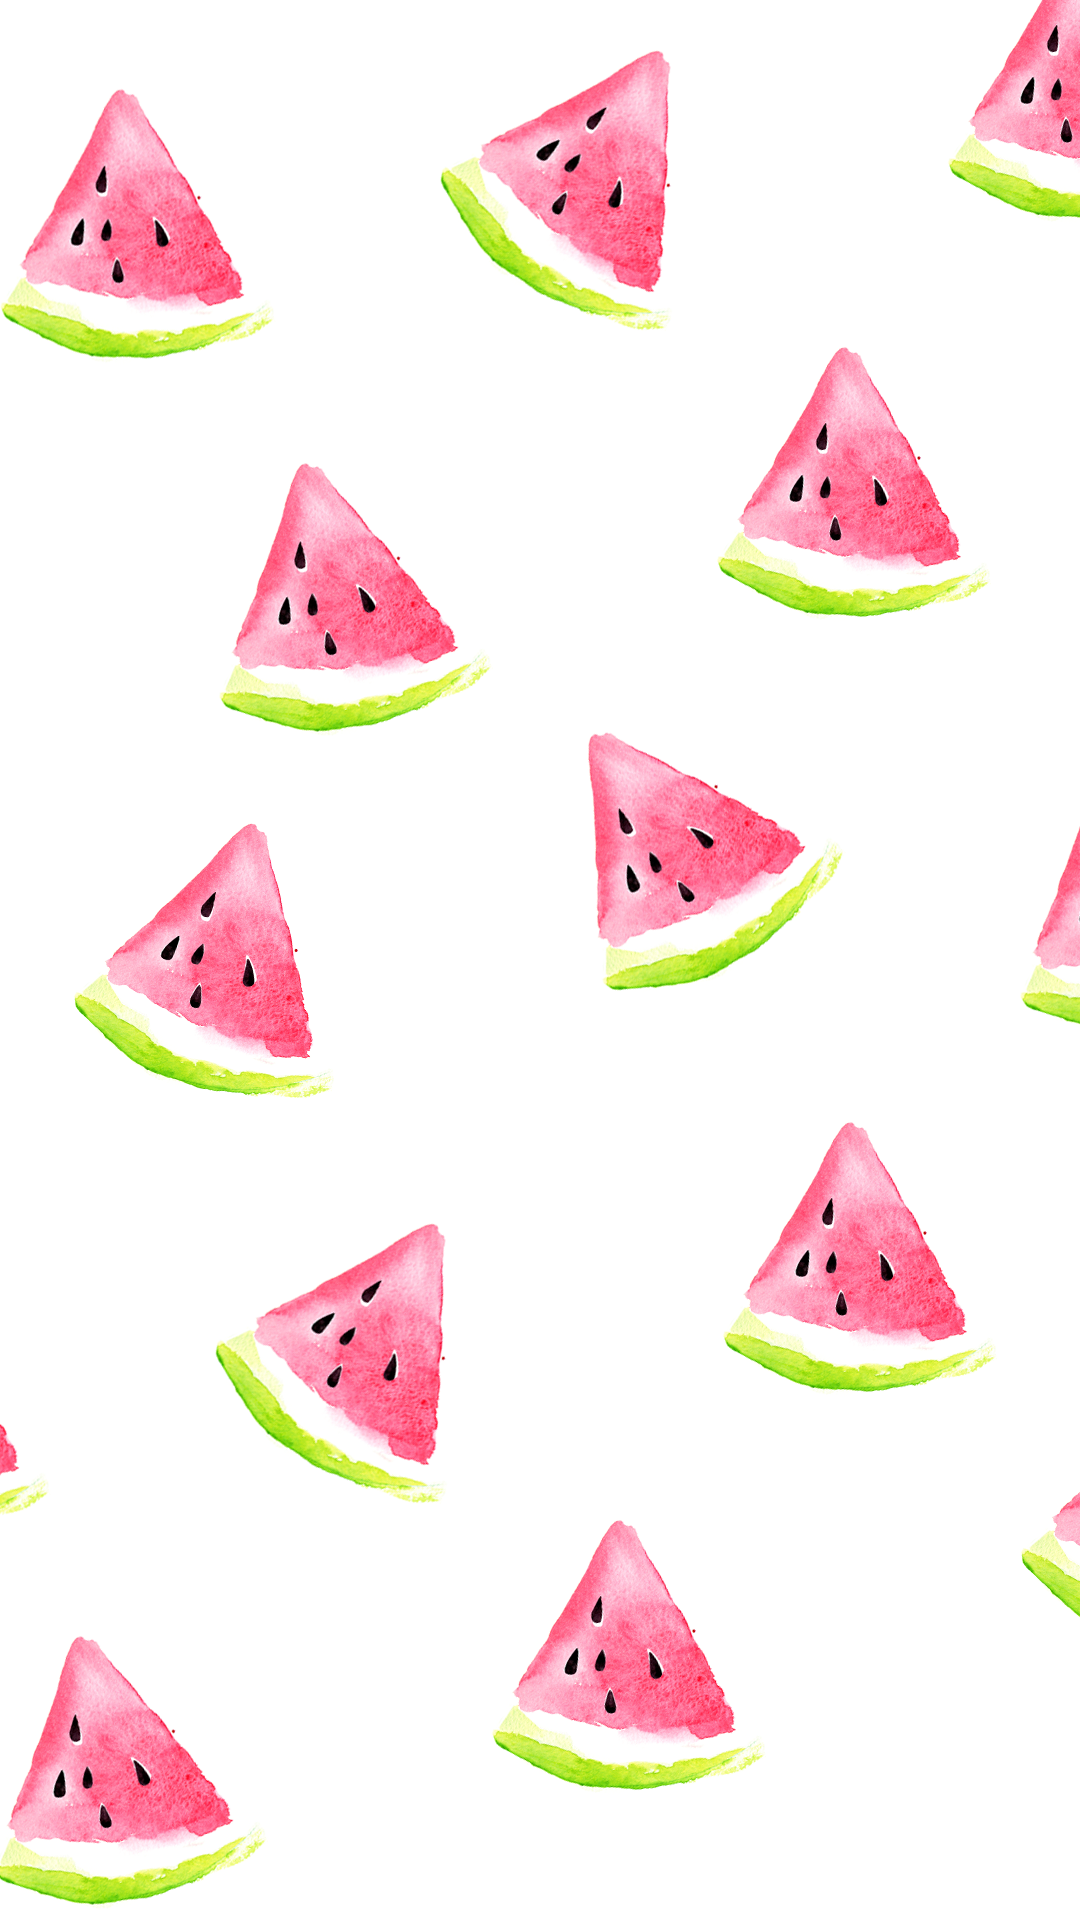 Related Image Watermelon Wallpaper iPhone Summer